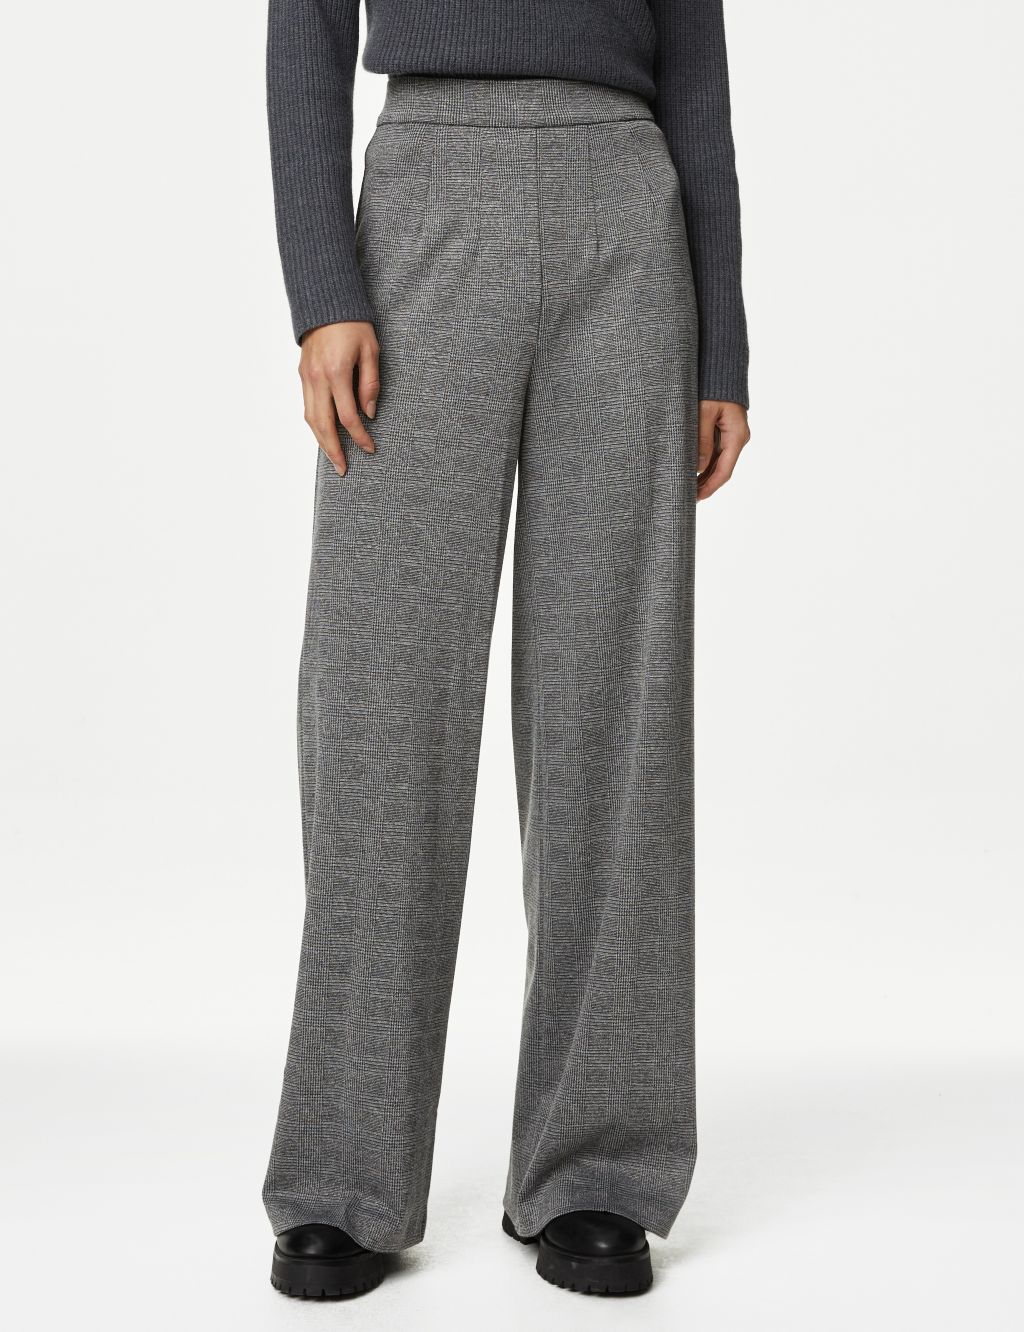 Slim Fit Cigarette trousers - Grey marl/Checked - Men